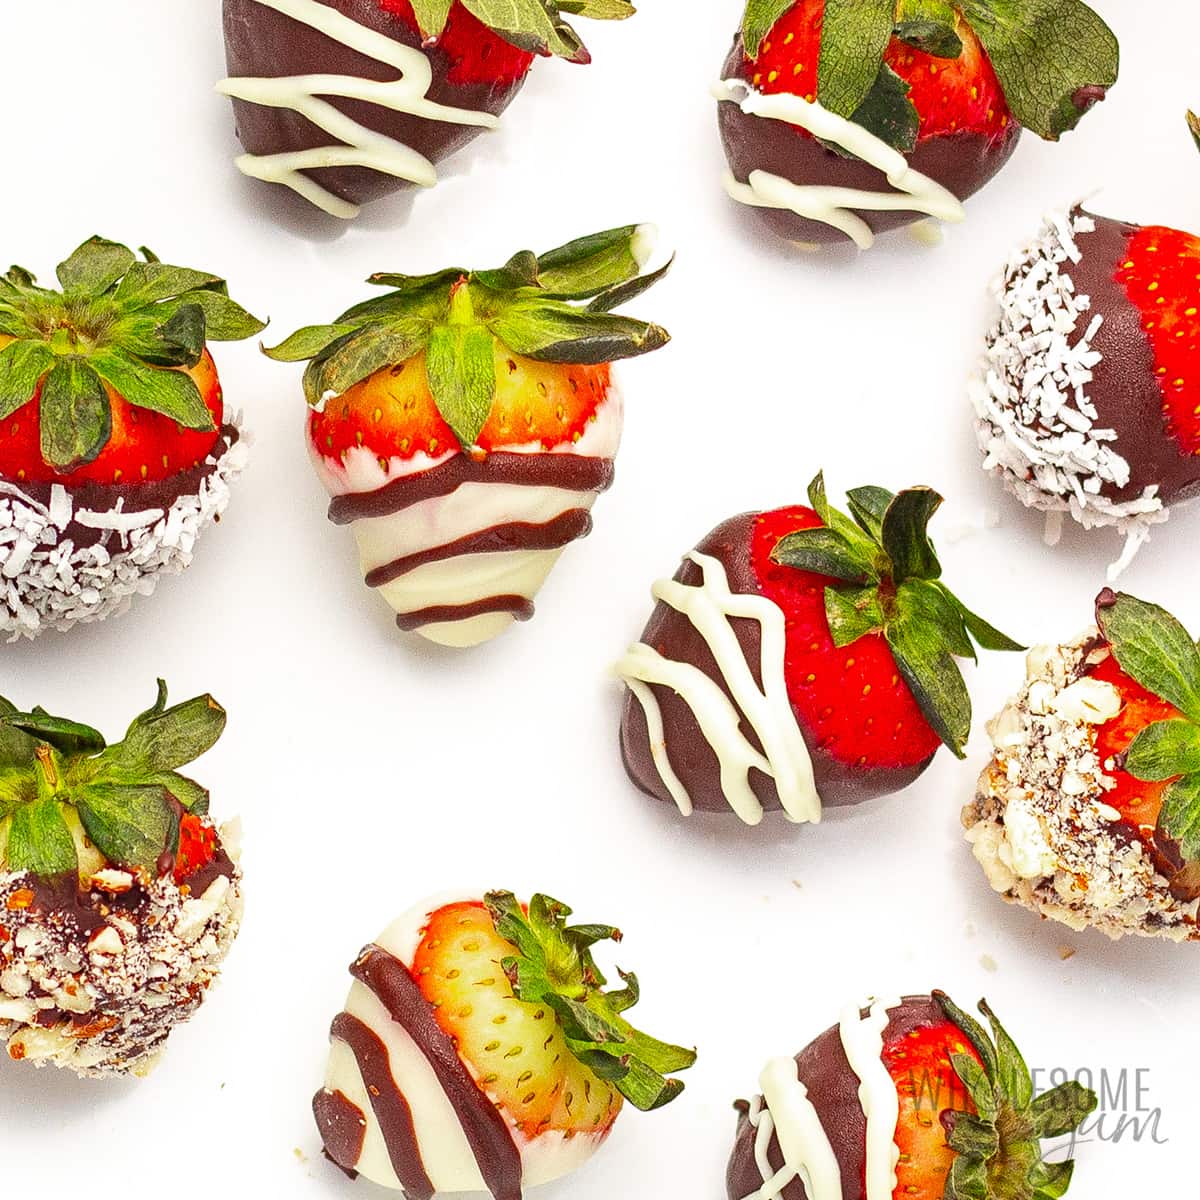 Keto chocolate covered strawberries on a white background.